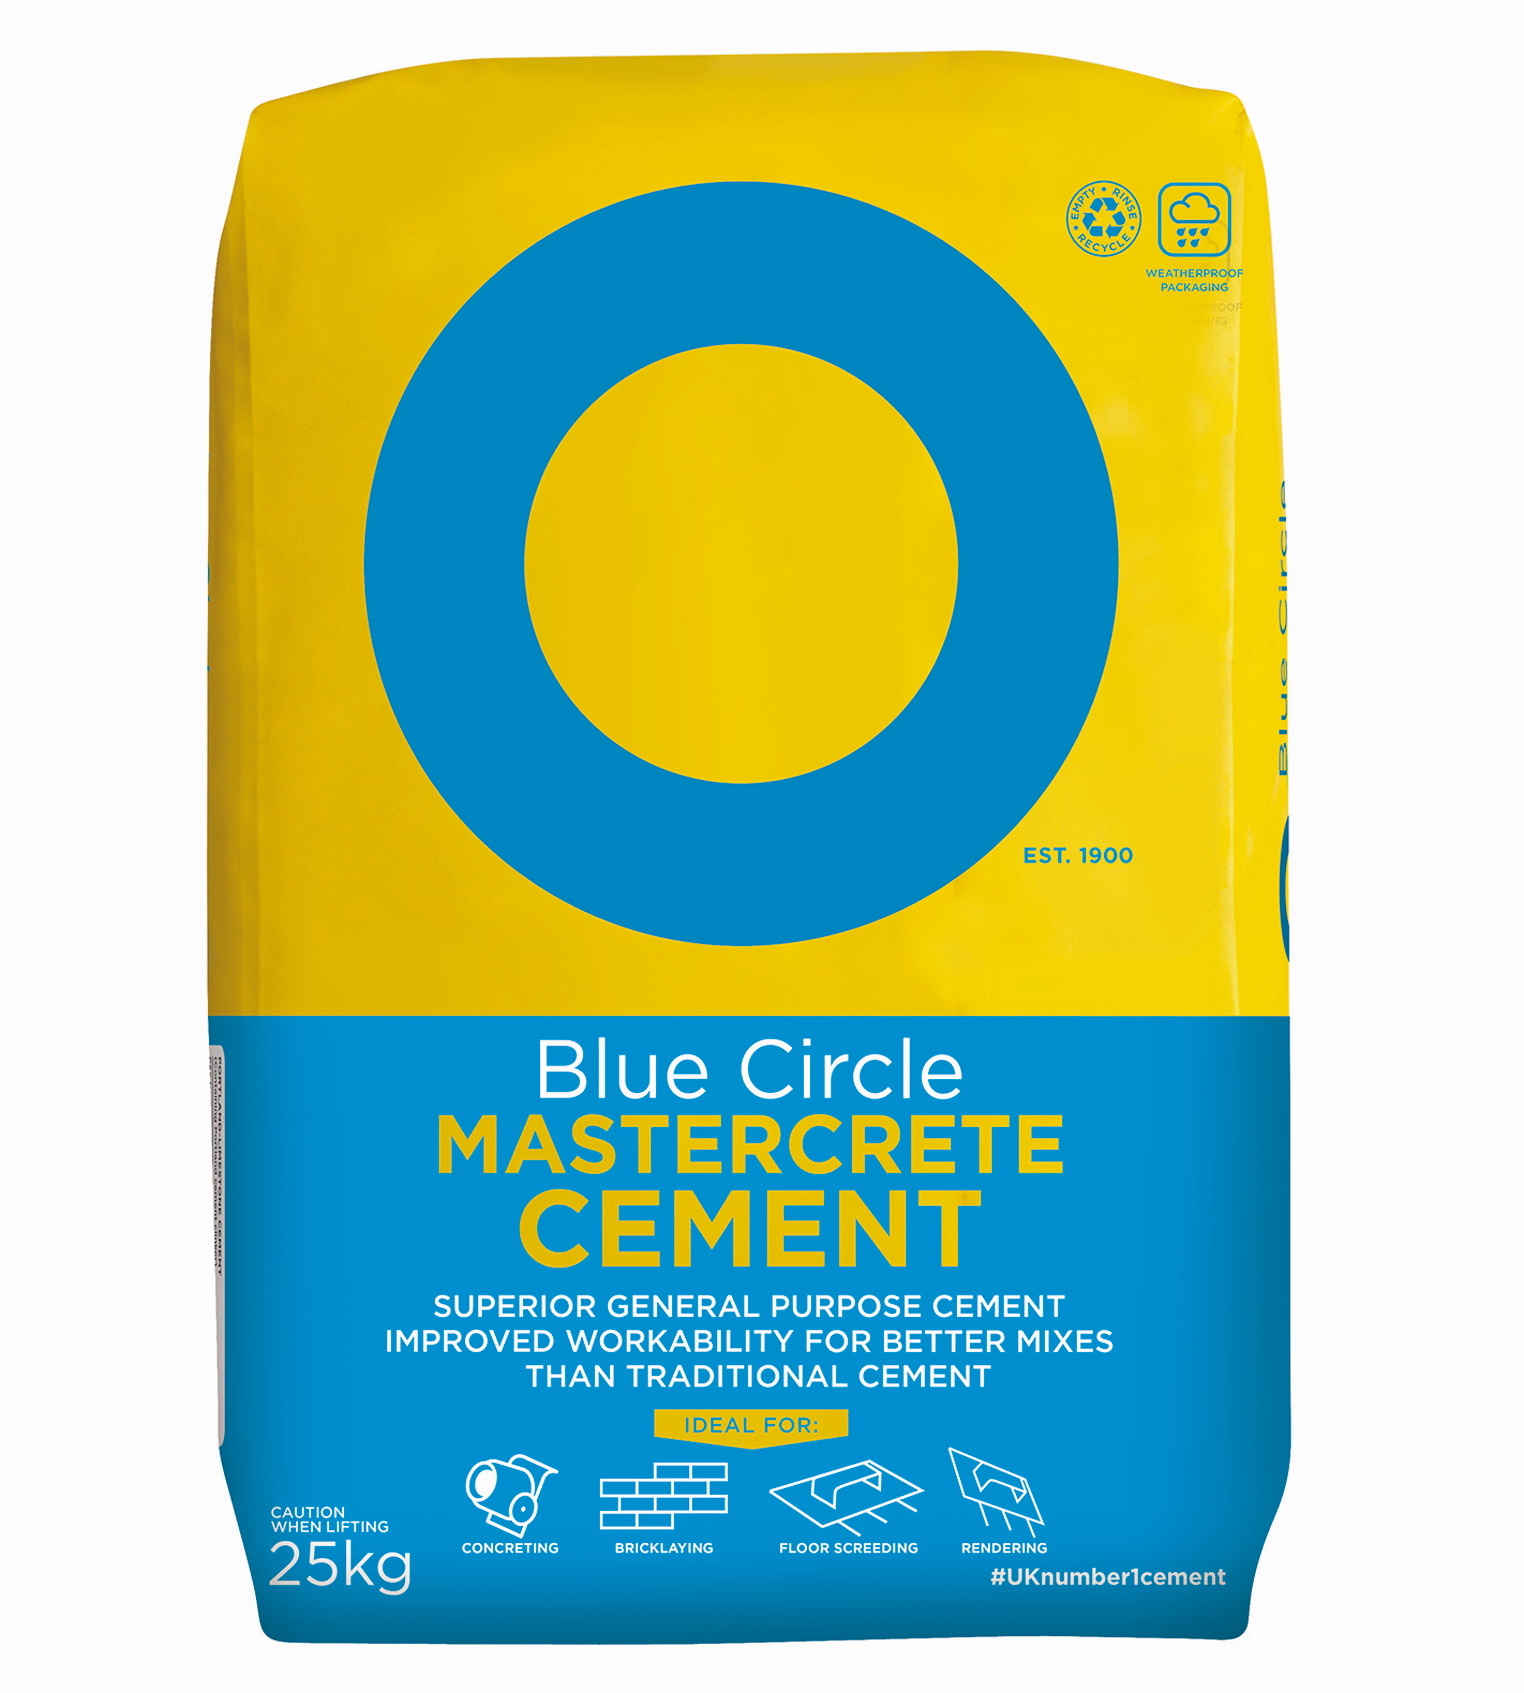 Tarmac first to launch 50% recycled content packaging for cement products